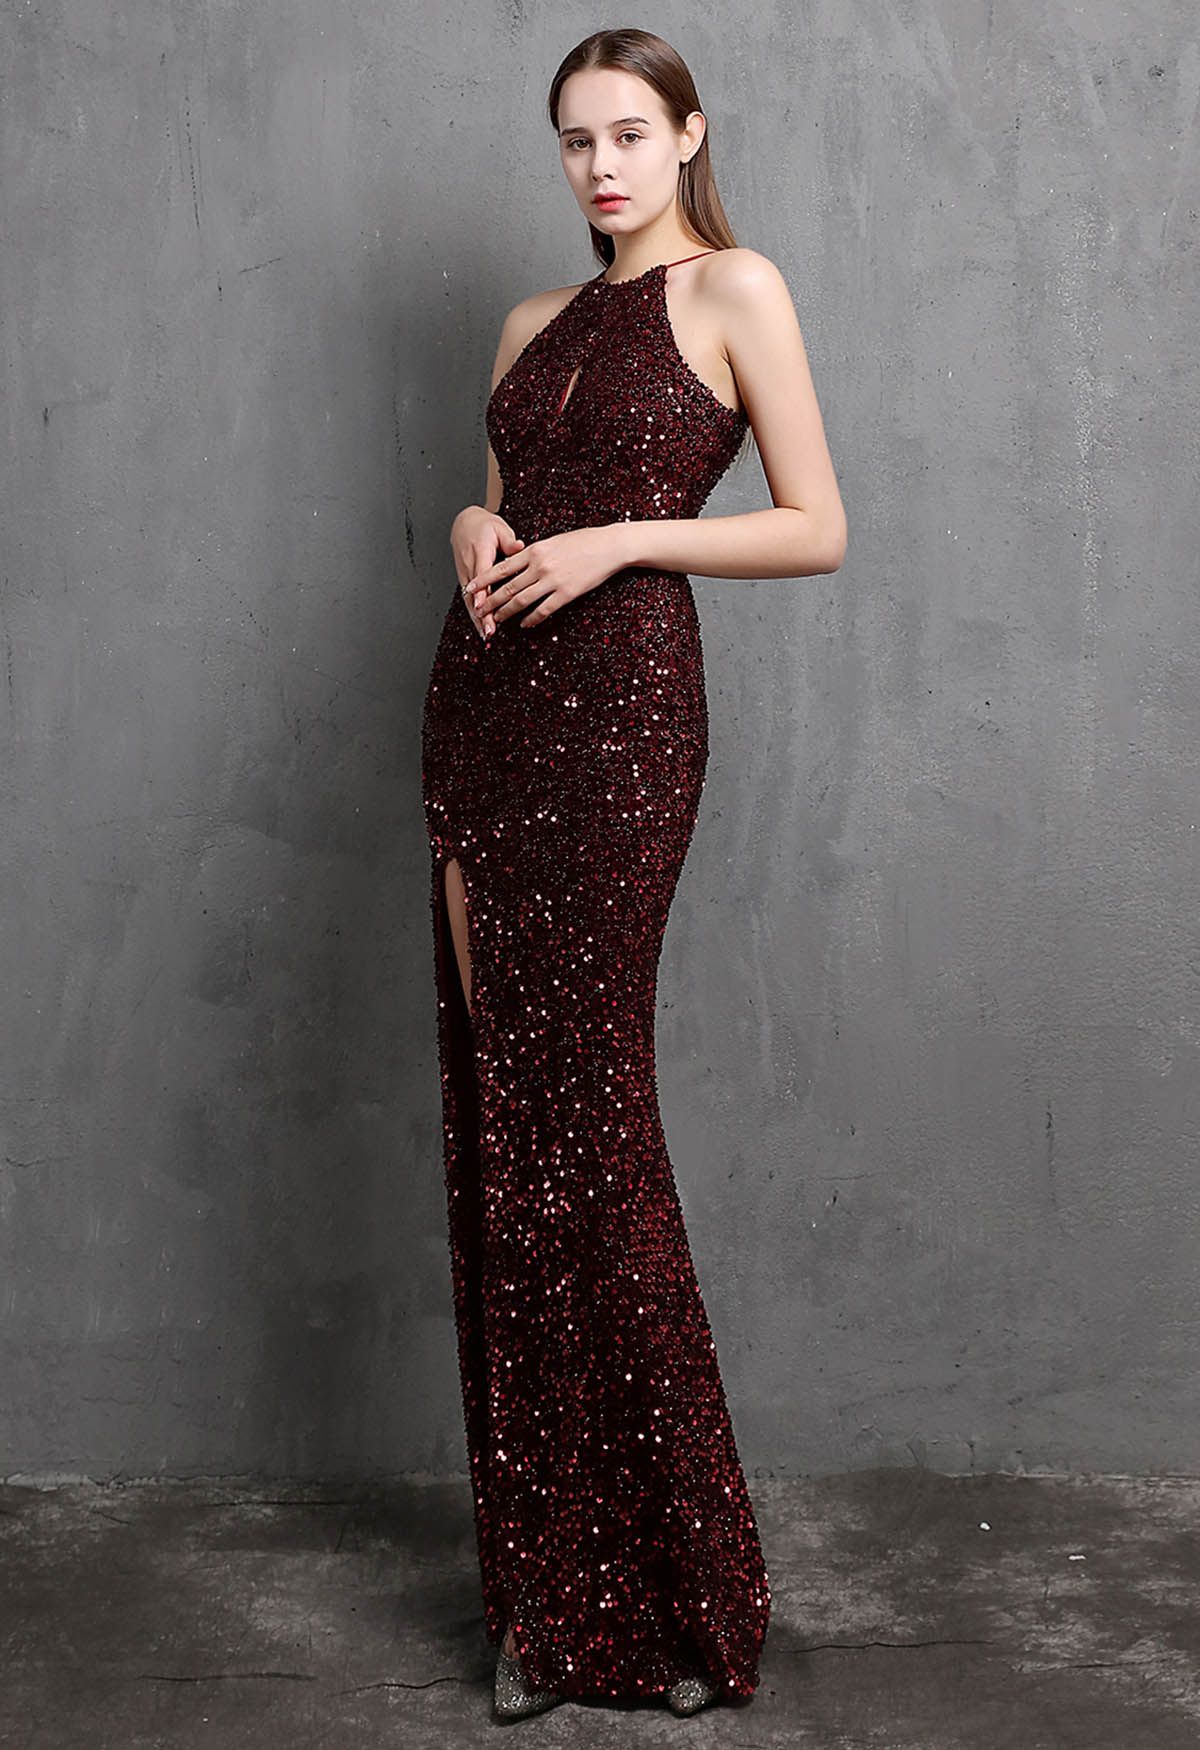 Halter Neck Cutout Sequined Slit Mermaid Gown in Burgundy